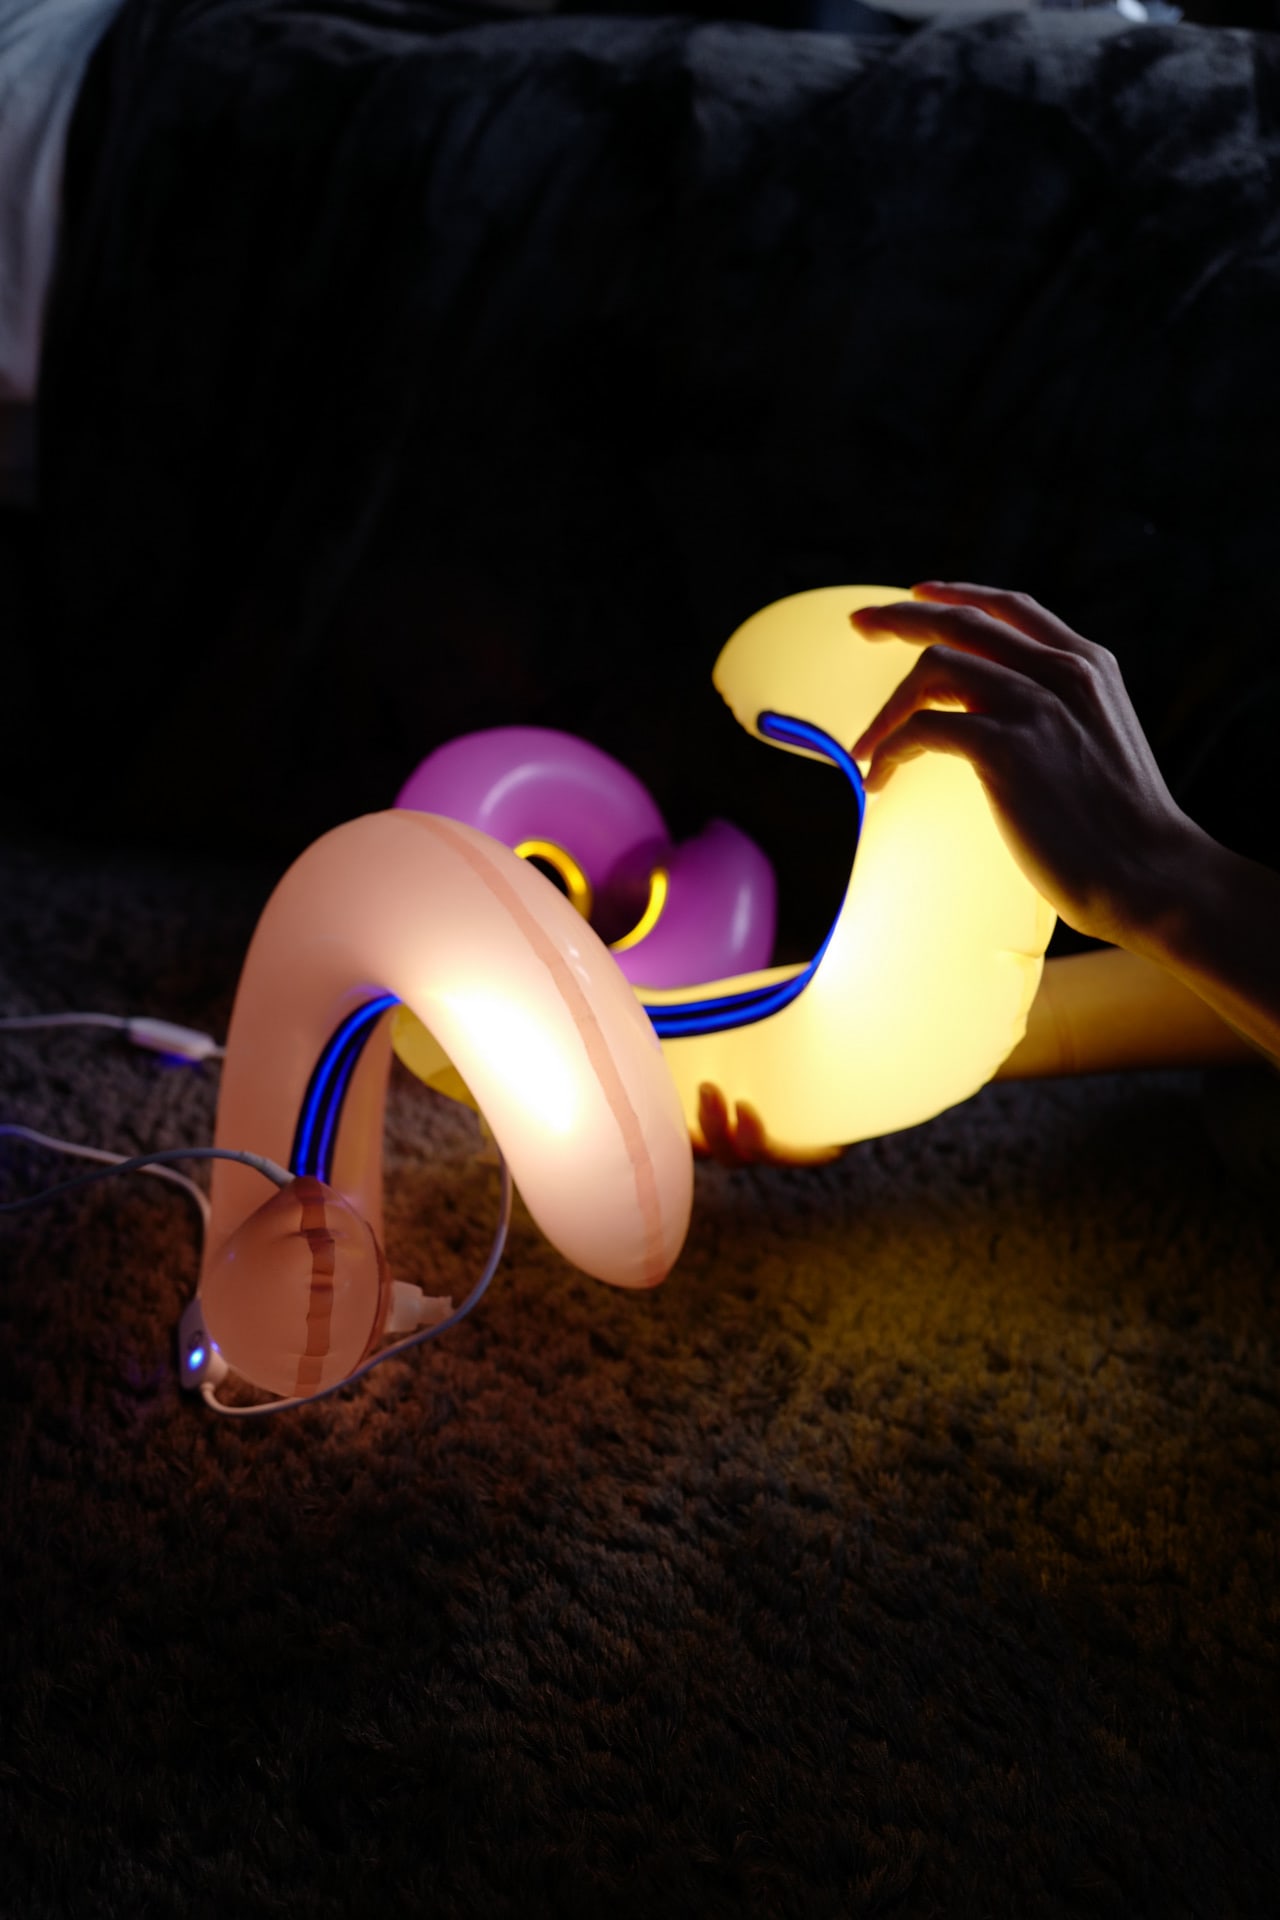 Hand squeezing and turning colorful latex lamps